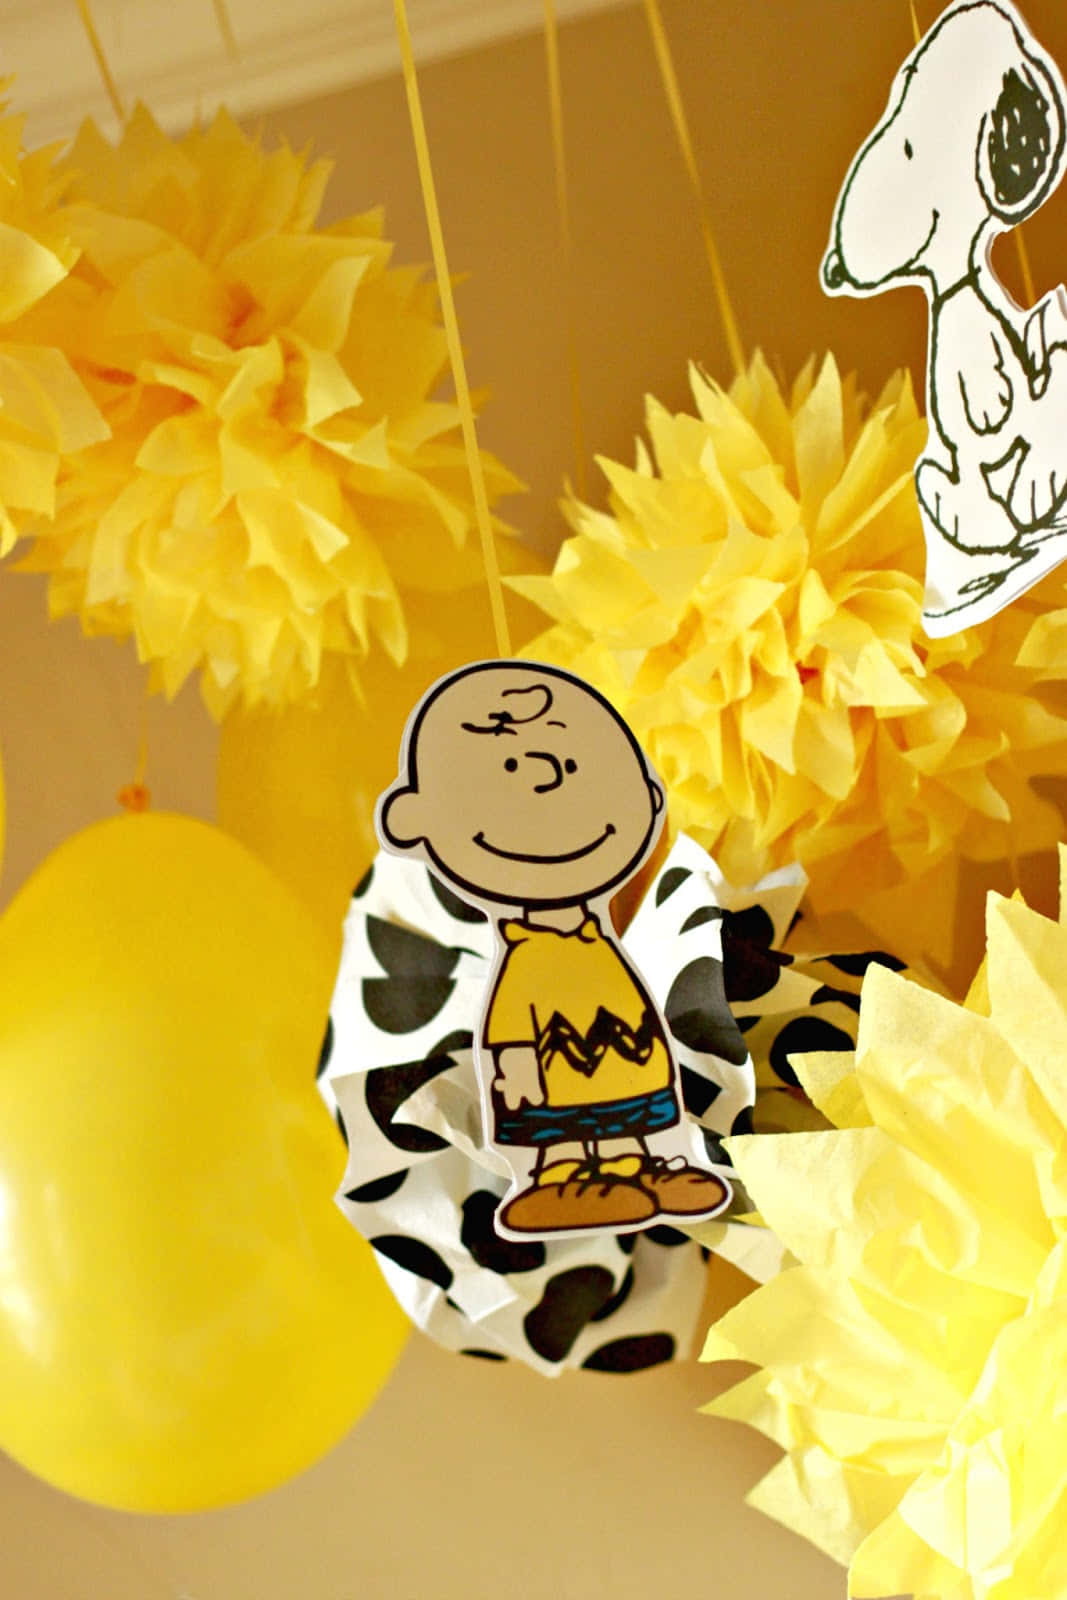 Celebrating another Birthday with Charlie Brown! Wallpaper